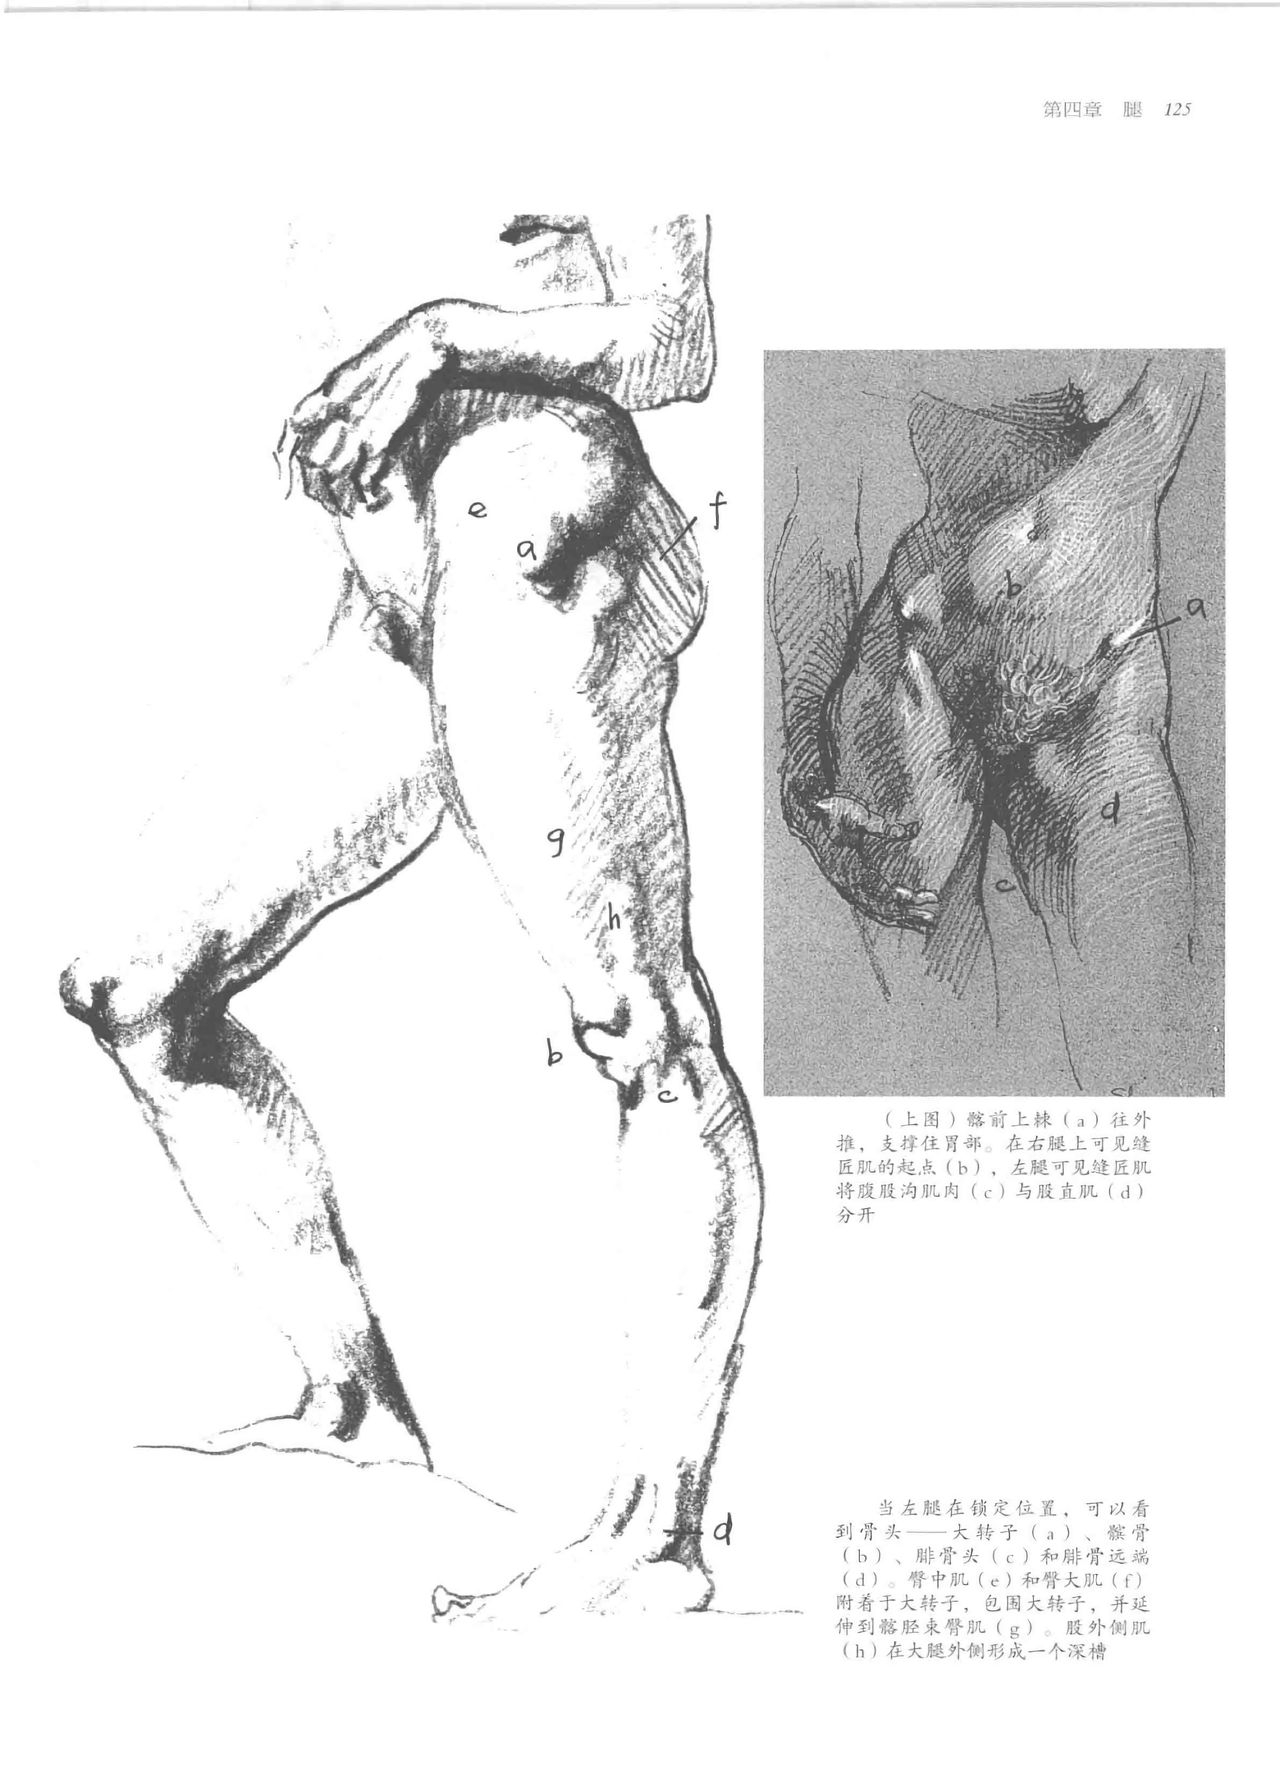 Anatomy-A Complete Guide for Artists - Joseph Sheppard [Chinese] 125